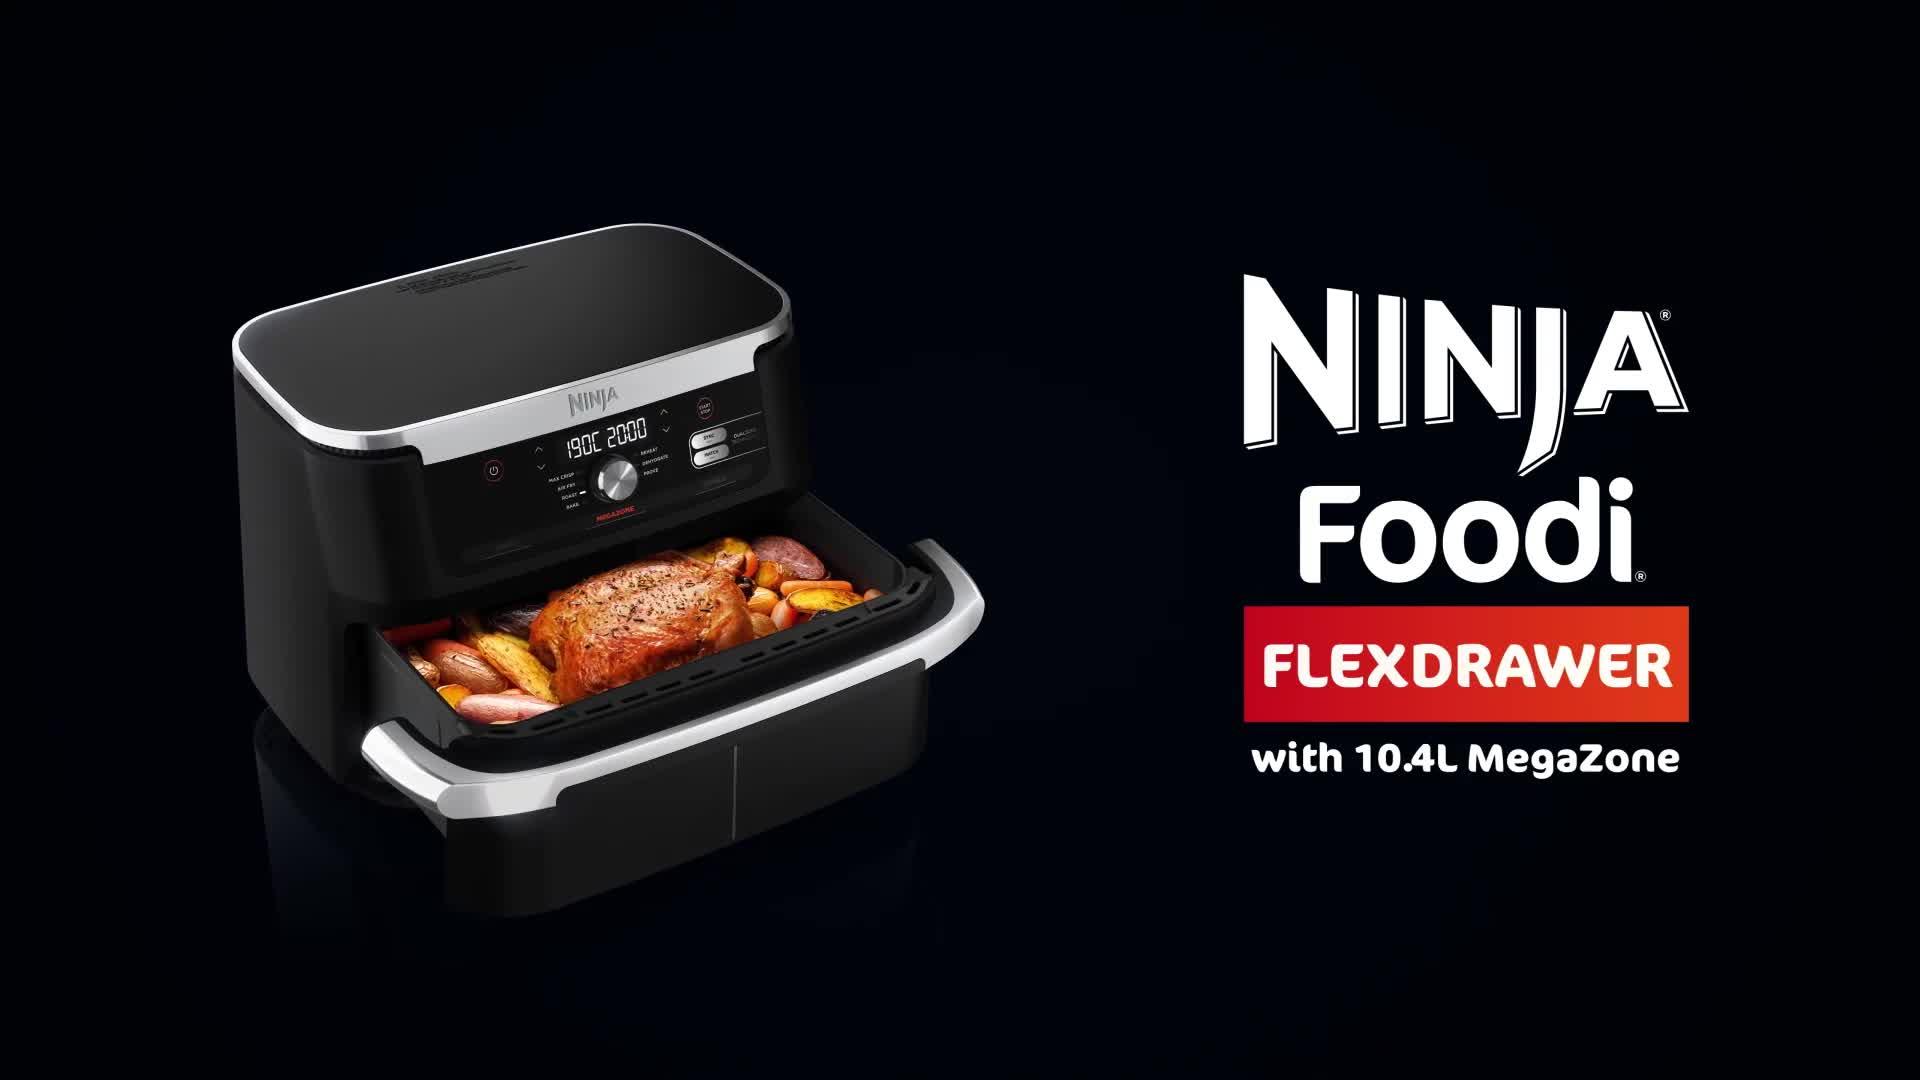 Ninja's regularly up to $280 Foodi 6.5-qt. 14-in-1 multi-cooker air fryer  is yours for $109 today